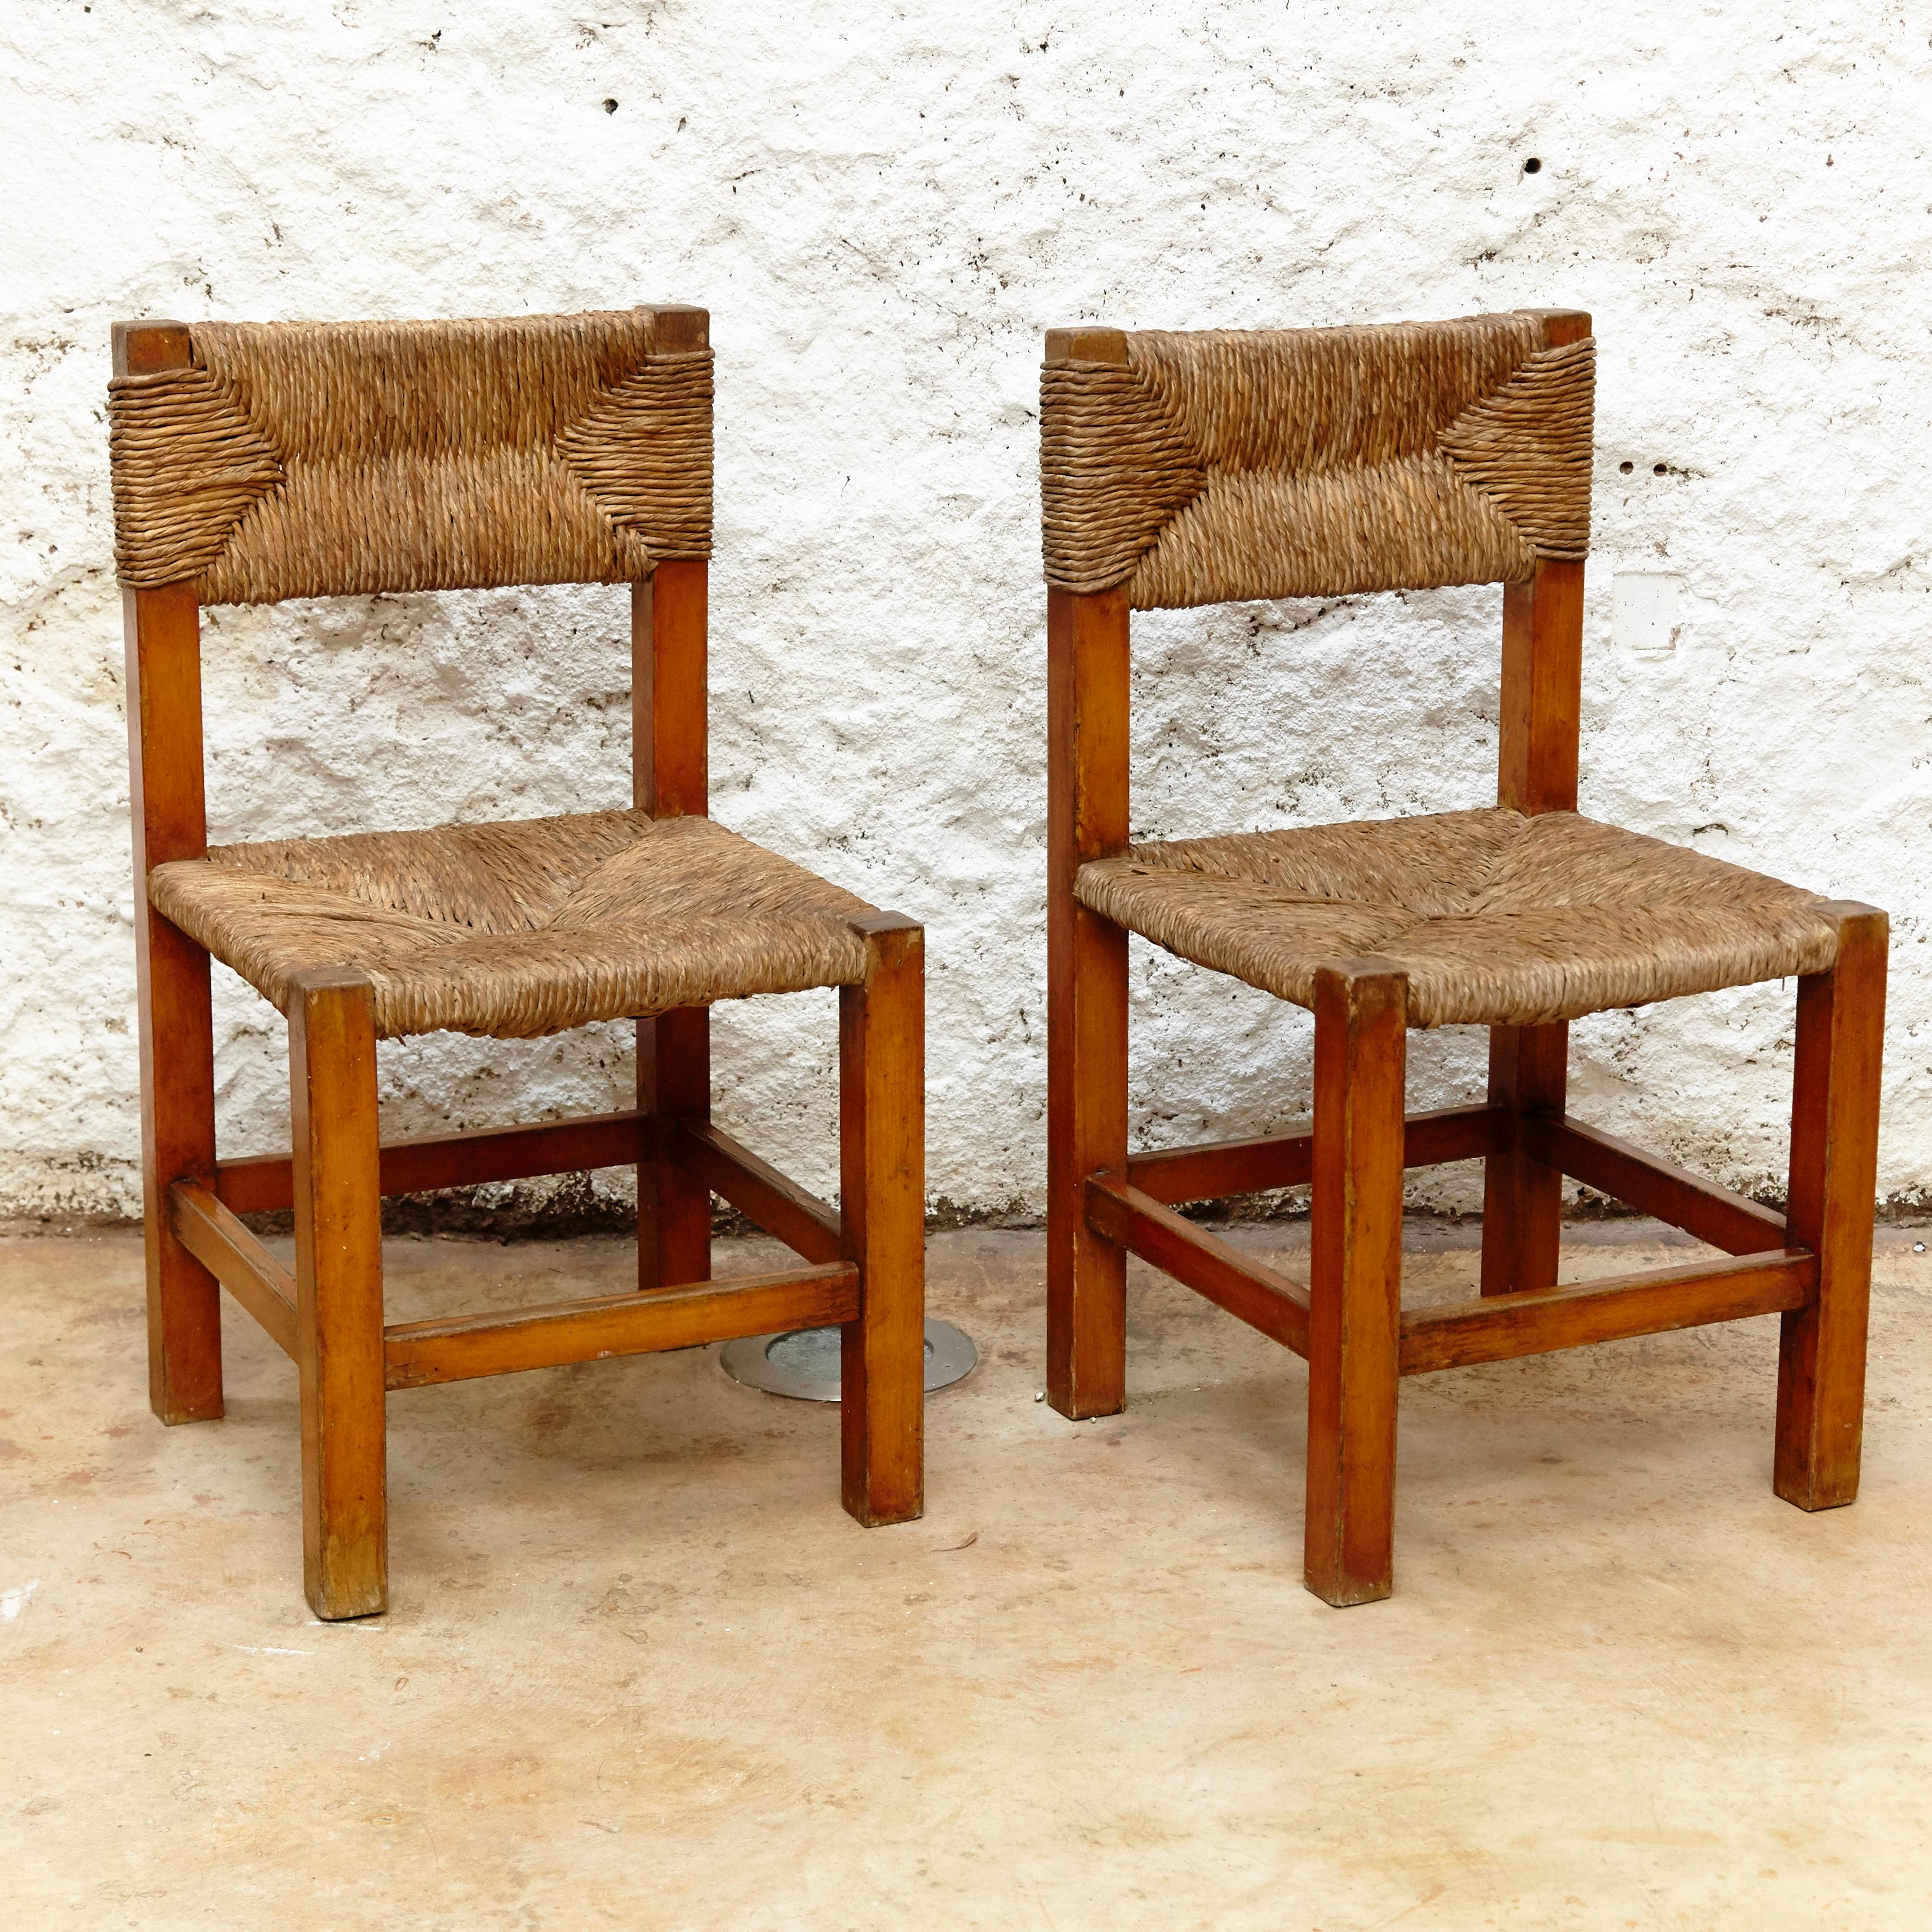 Mid-Century Modern Set of Four Chairs after Charlotte Perriand in Wood and Rattan, circa 1950